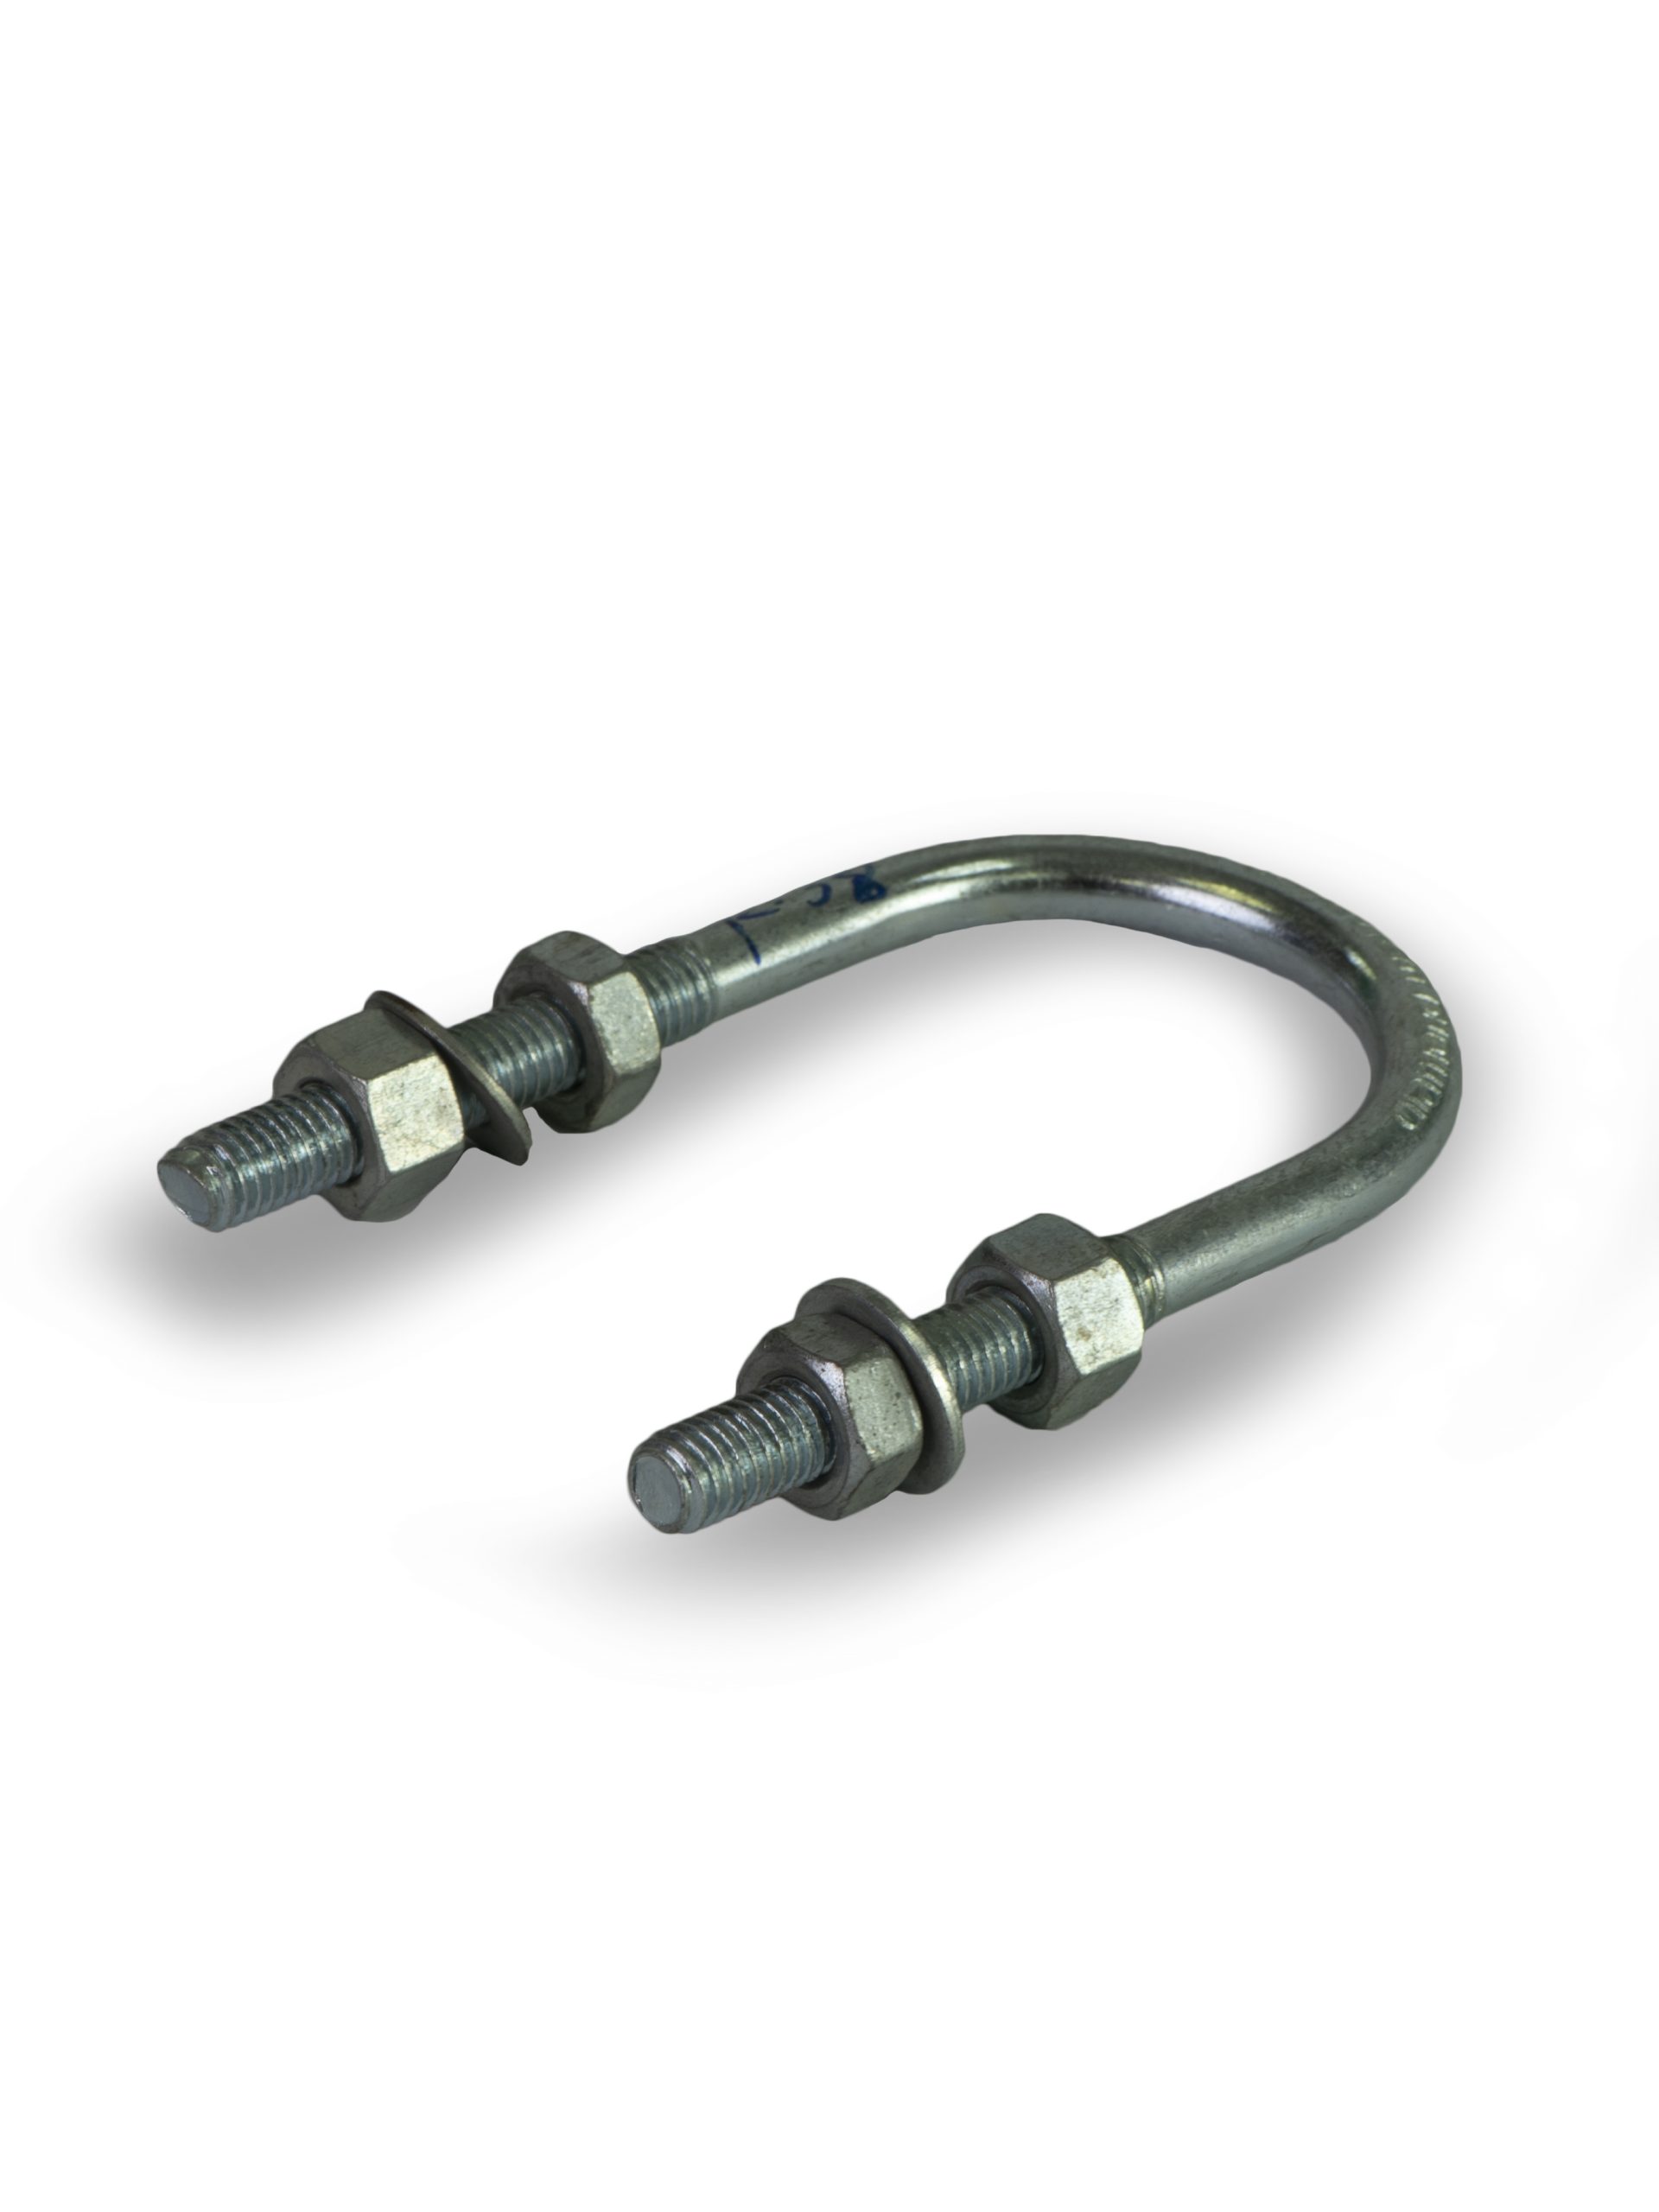 U CLAMP 2 Inches X 8 MM WITH NUTS AND WASHERS from Gas Equipment Company Llc Abu Dhabi, UNITED ARAB EMIRATES